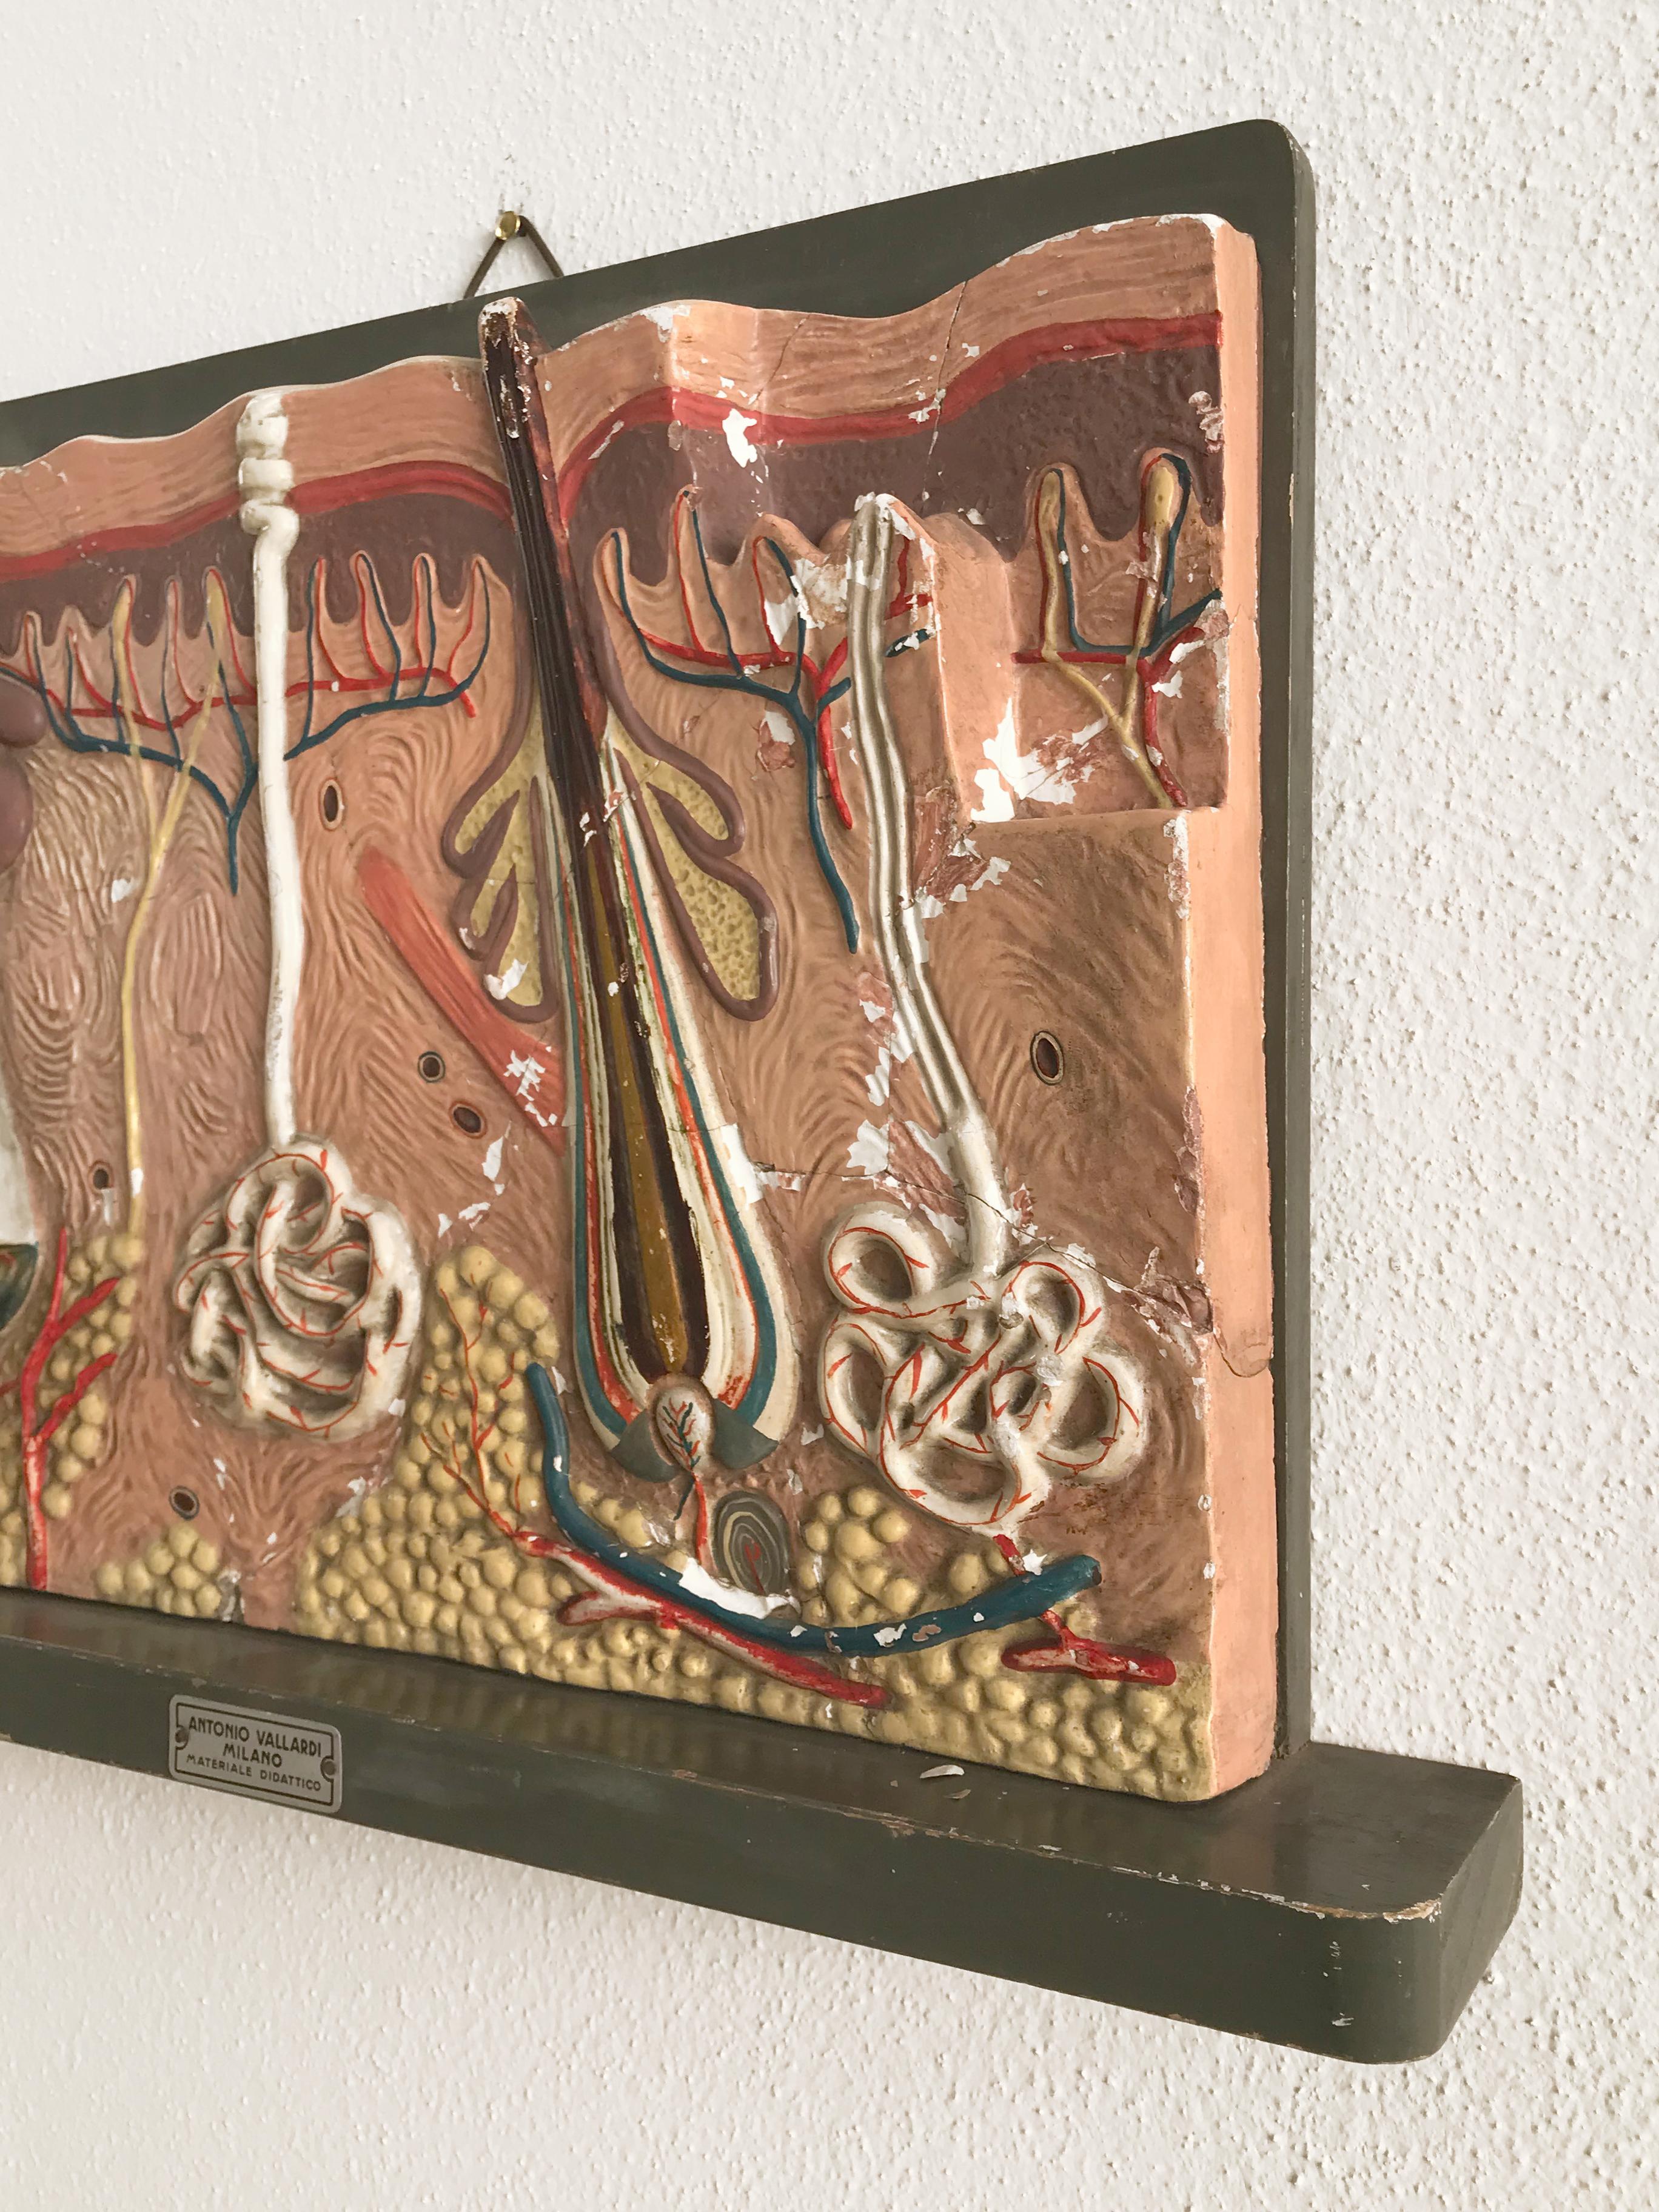 Italian midcentury three-dimensional didactic anatomical panel in plaster with Antonio Vallardi Milano label, Italy 1950s

Please note that the item is original of the period and this shows normal signs of age and use.